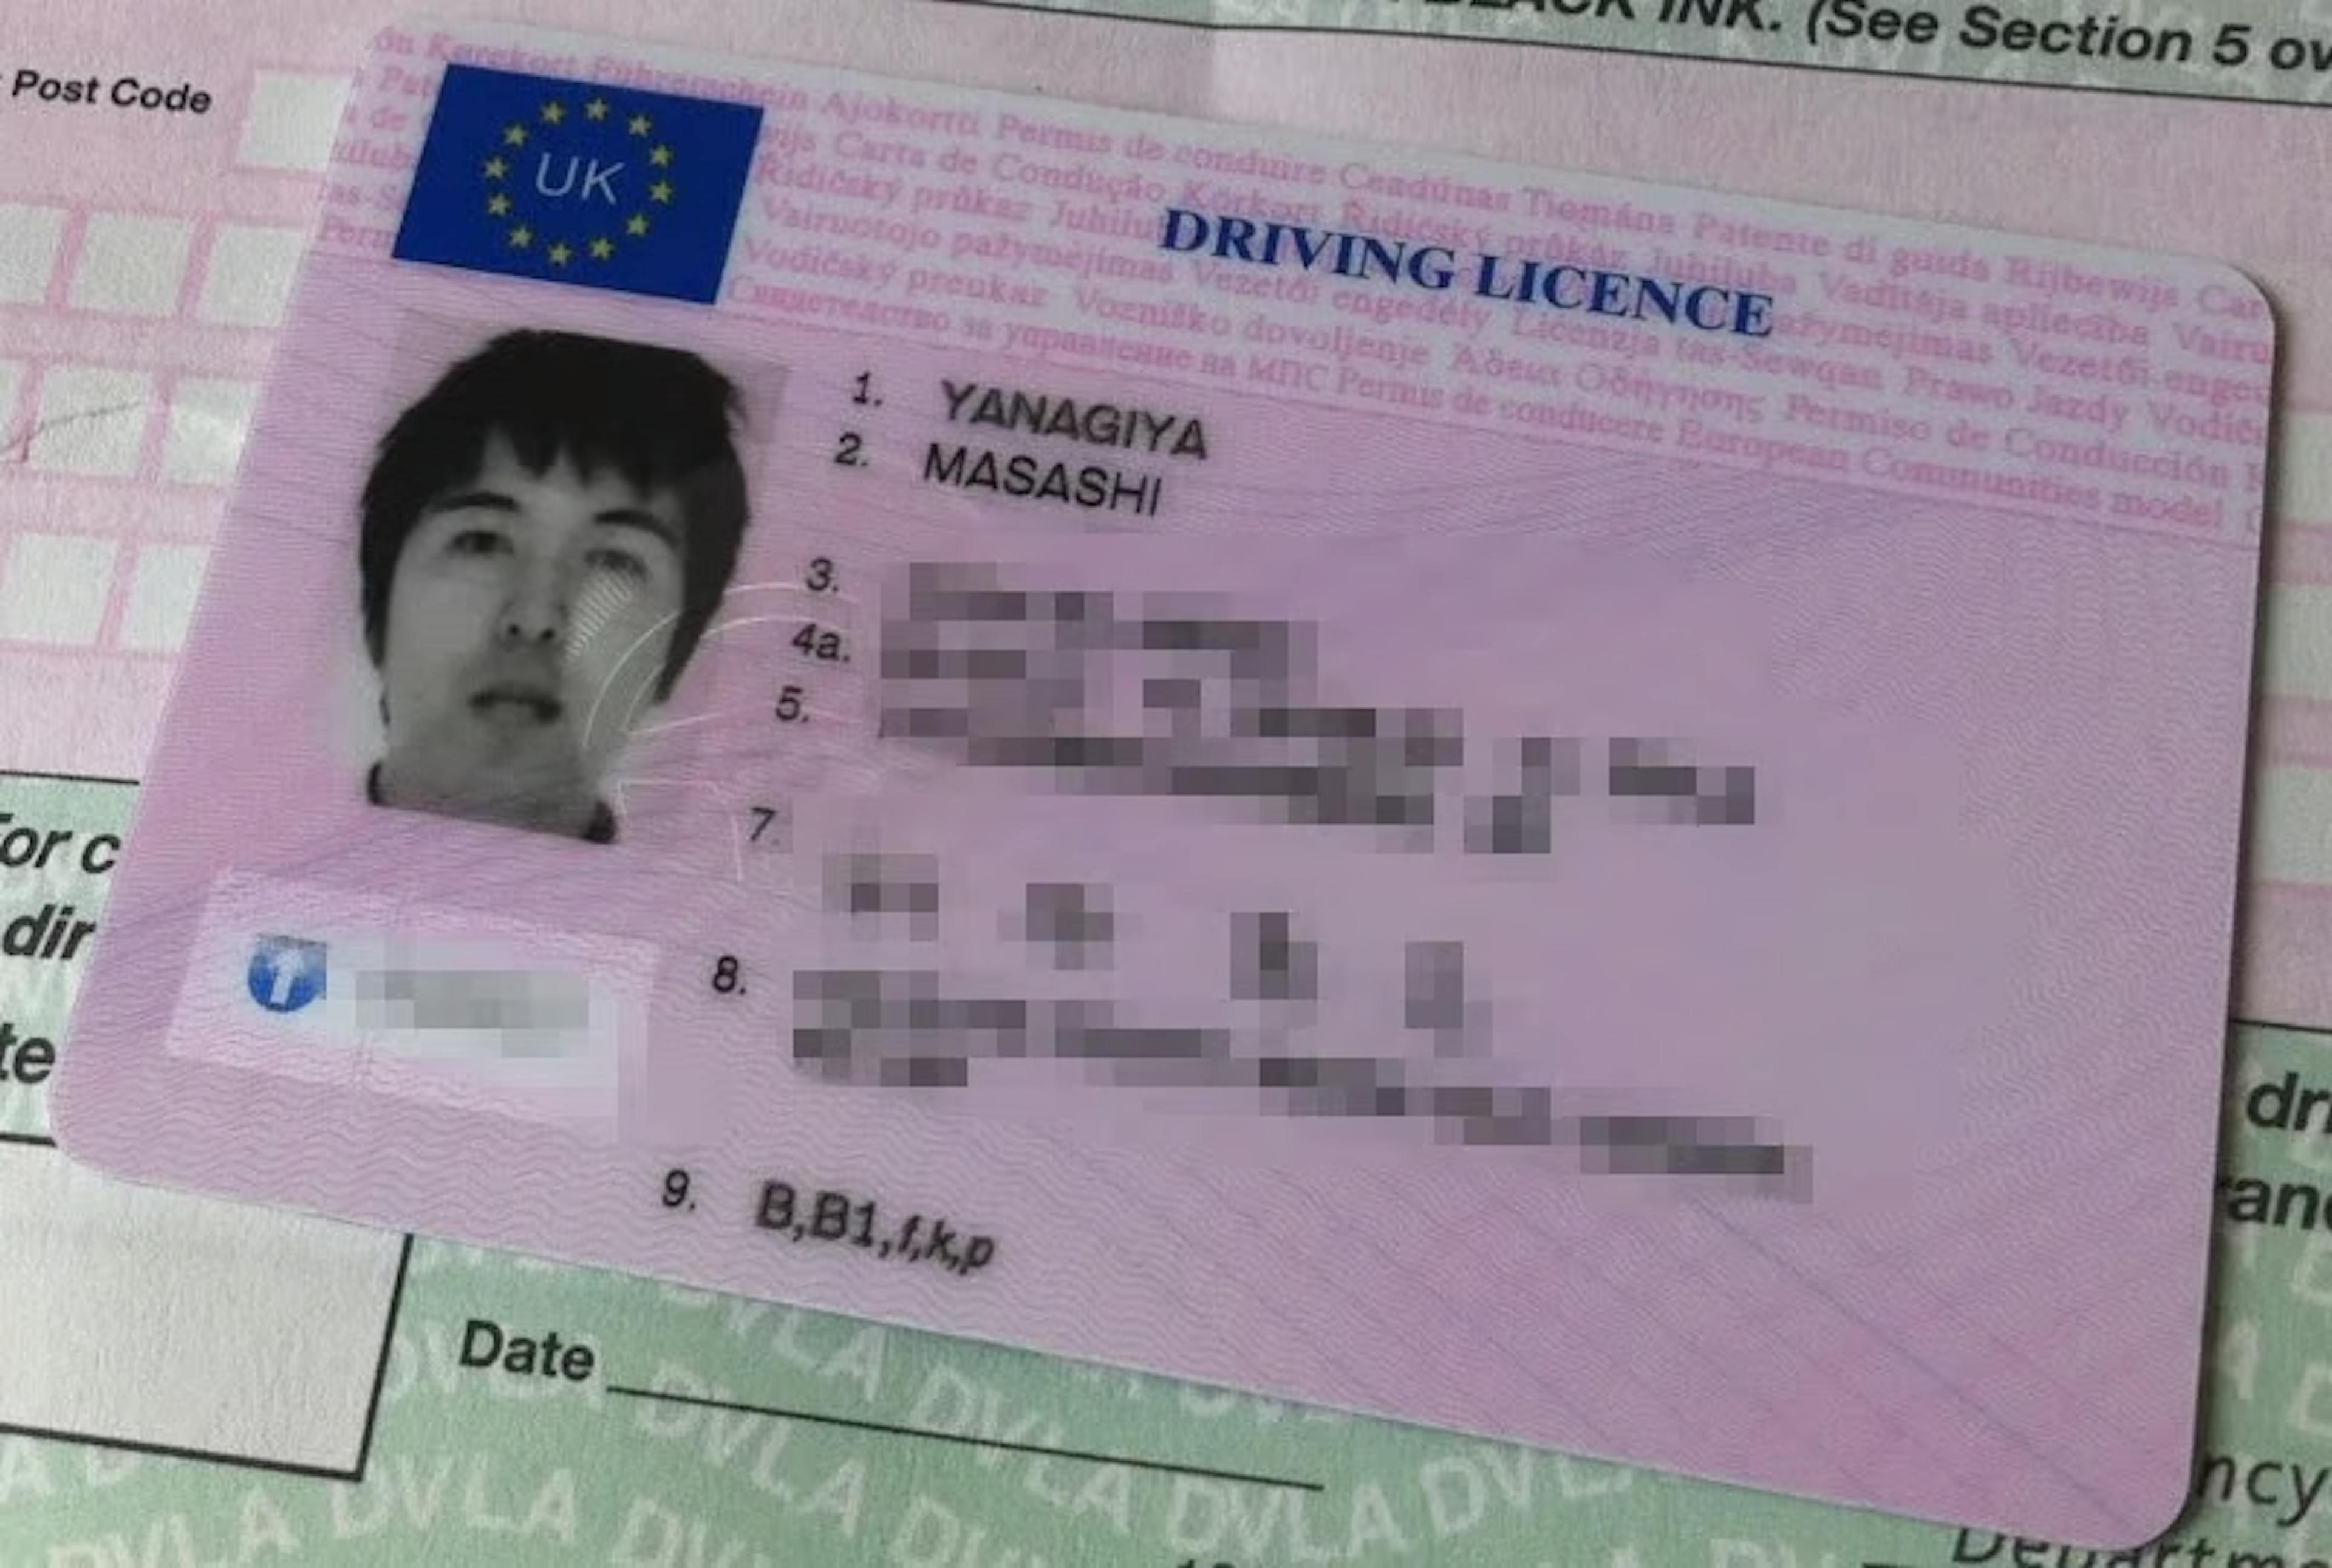 An image of a full UK driving license